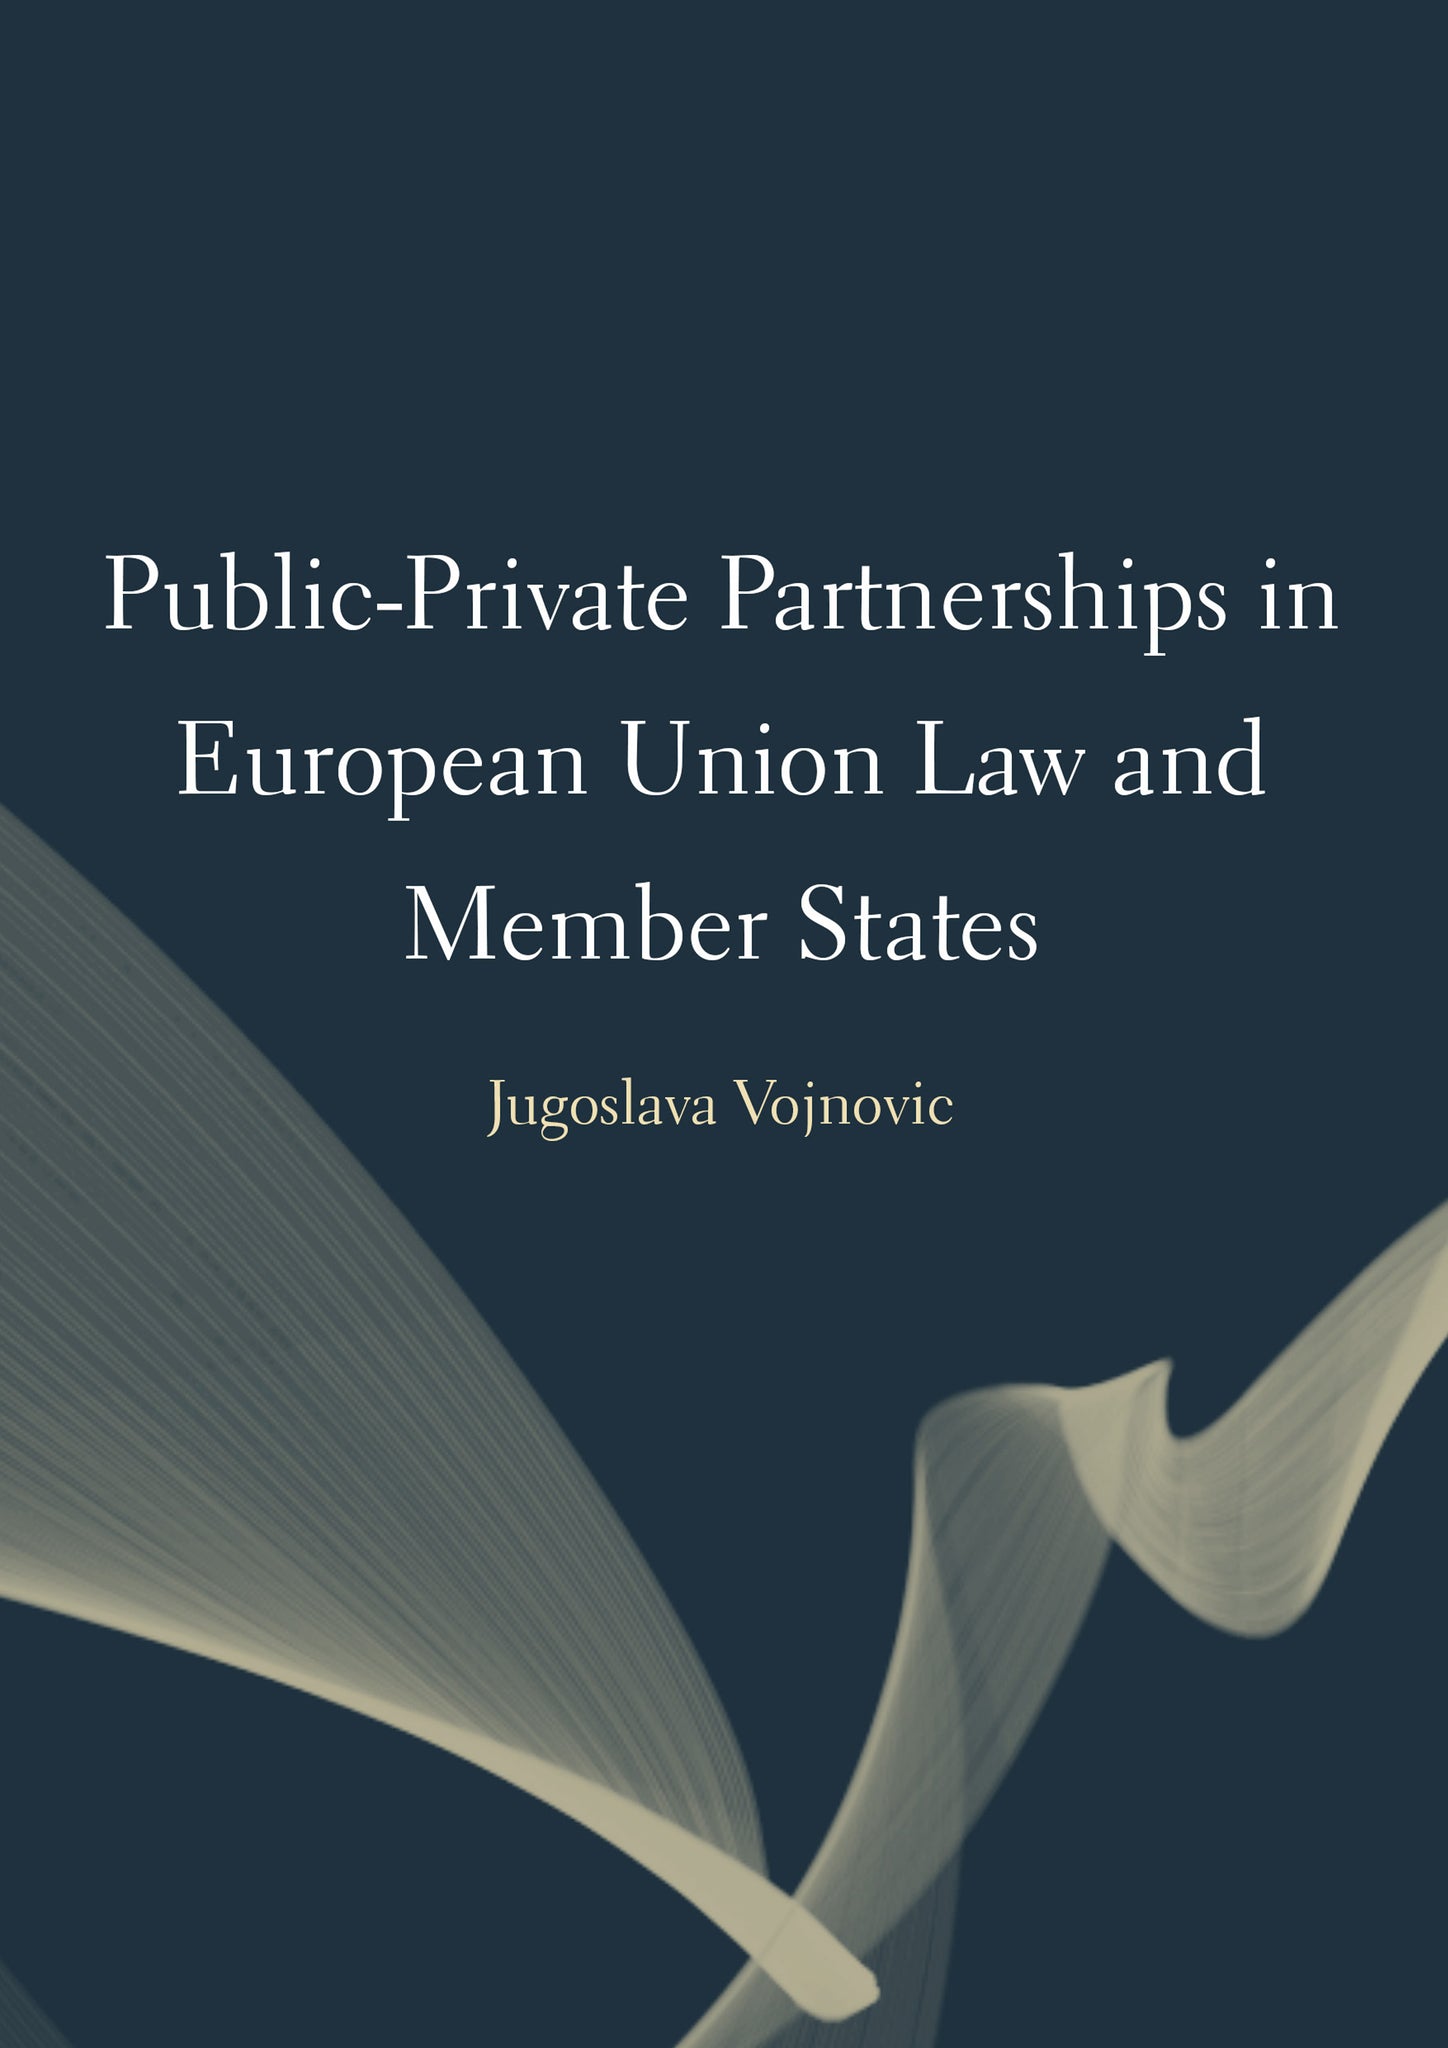 Public-Private Partnerships in European Union Law and Member States